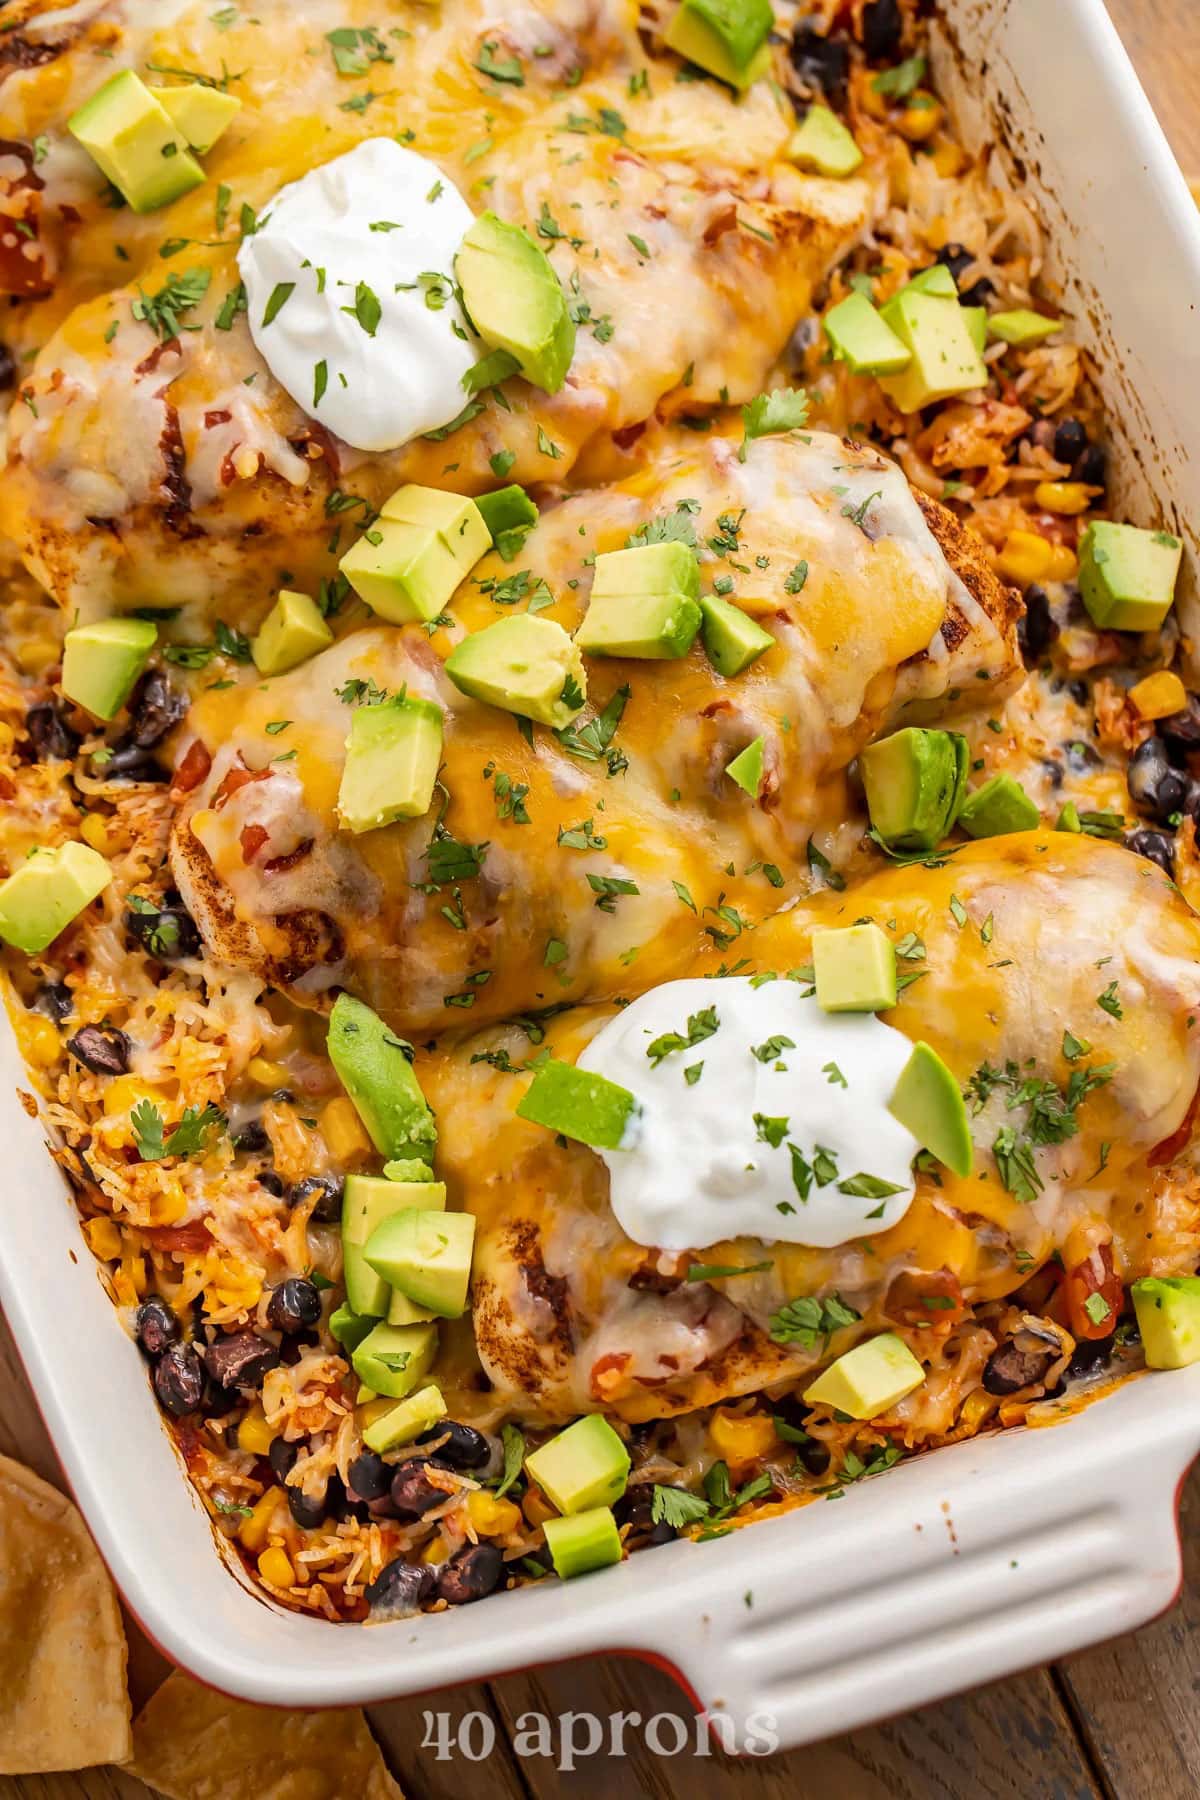 A casserole dish holding Mexican chicken casserole with rice, beans, and veggies, topped with avocado and sour cream.